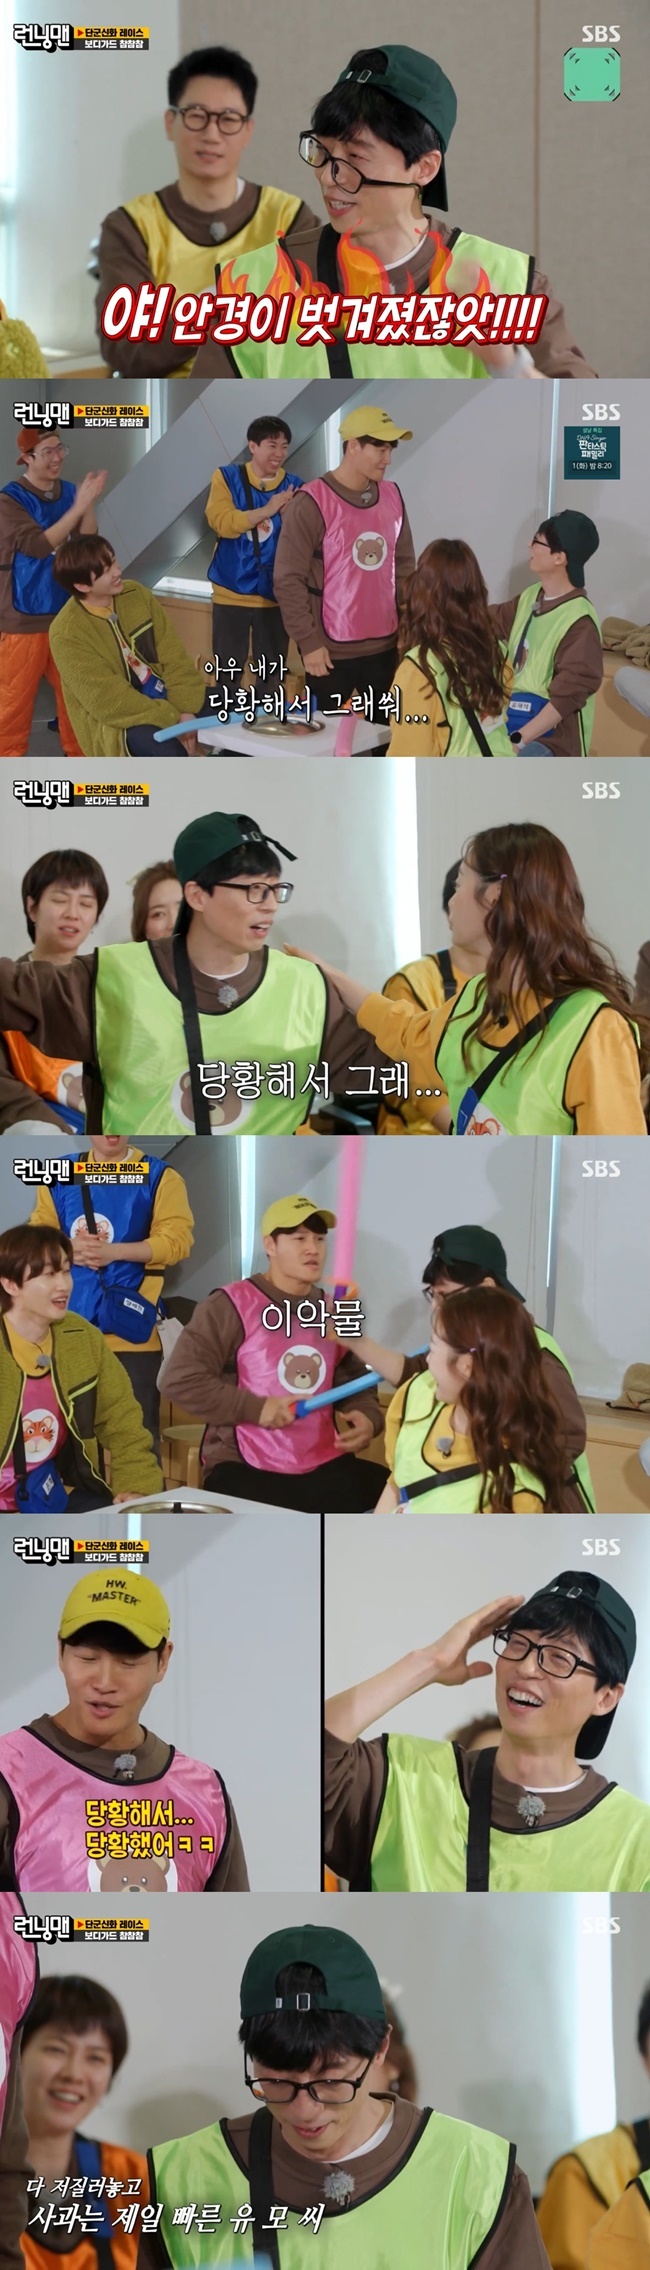 Broadcaster Yoo Jae-Suk has avenged singer Kim Jong-kook.On January 30, SBS Running Man was decorated with Dangun myth race and the bodyguard game was held.Eunhyuk, Kim Jong-kook team face off against Jeon So-min and Yoo Jae-Suk teamOne by one, the game was played, and the other was defended.With Yoo Jae-Suk and Eunhyuk as players, Kim Jong-kook joined forces to attack Yoo Jae-Suk.Yoo Jae-Suk, who was attacked in succession, laughed when he exploded, The glasses were peeled off.Yoo Jae-Suk attacked Kim Jong-kook after offering to defend Jeon So-minKim Jong-kook, who was hit by Yoo Jae-Suk suddenly, jumped up, and Yoo Jae-Suk excused thats because it was embarrassing.Re-resumed Kyonggi. Kim Jong-kook also gave up his Eunhyuk defense and attacked Yoo Jae-Suk.In the next Kyonggi, too, Yoo Jae-Suk hit Kim Jong-kook and took the heat.Eventually Kim Jong-kook was furious, How many times do you panic? and Yoo Jae-Suk exclaimed, I was out of my mind; Im sorry.Yang Se-chan, who saw this, laughed, saying, The real gangster is Jae-seok.